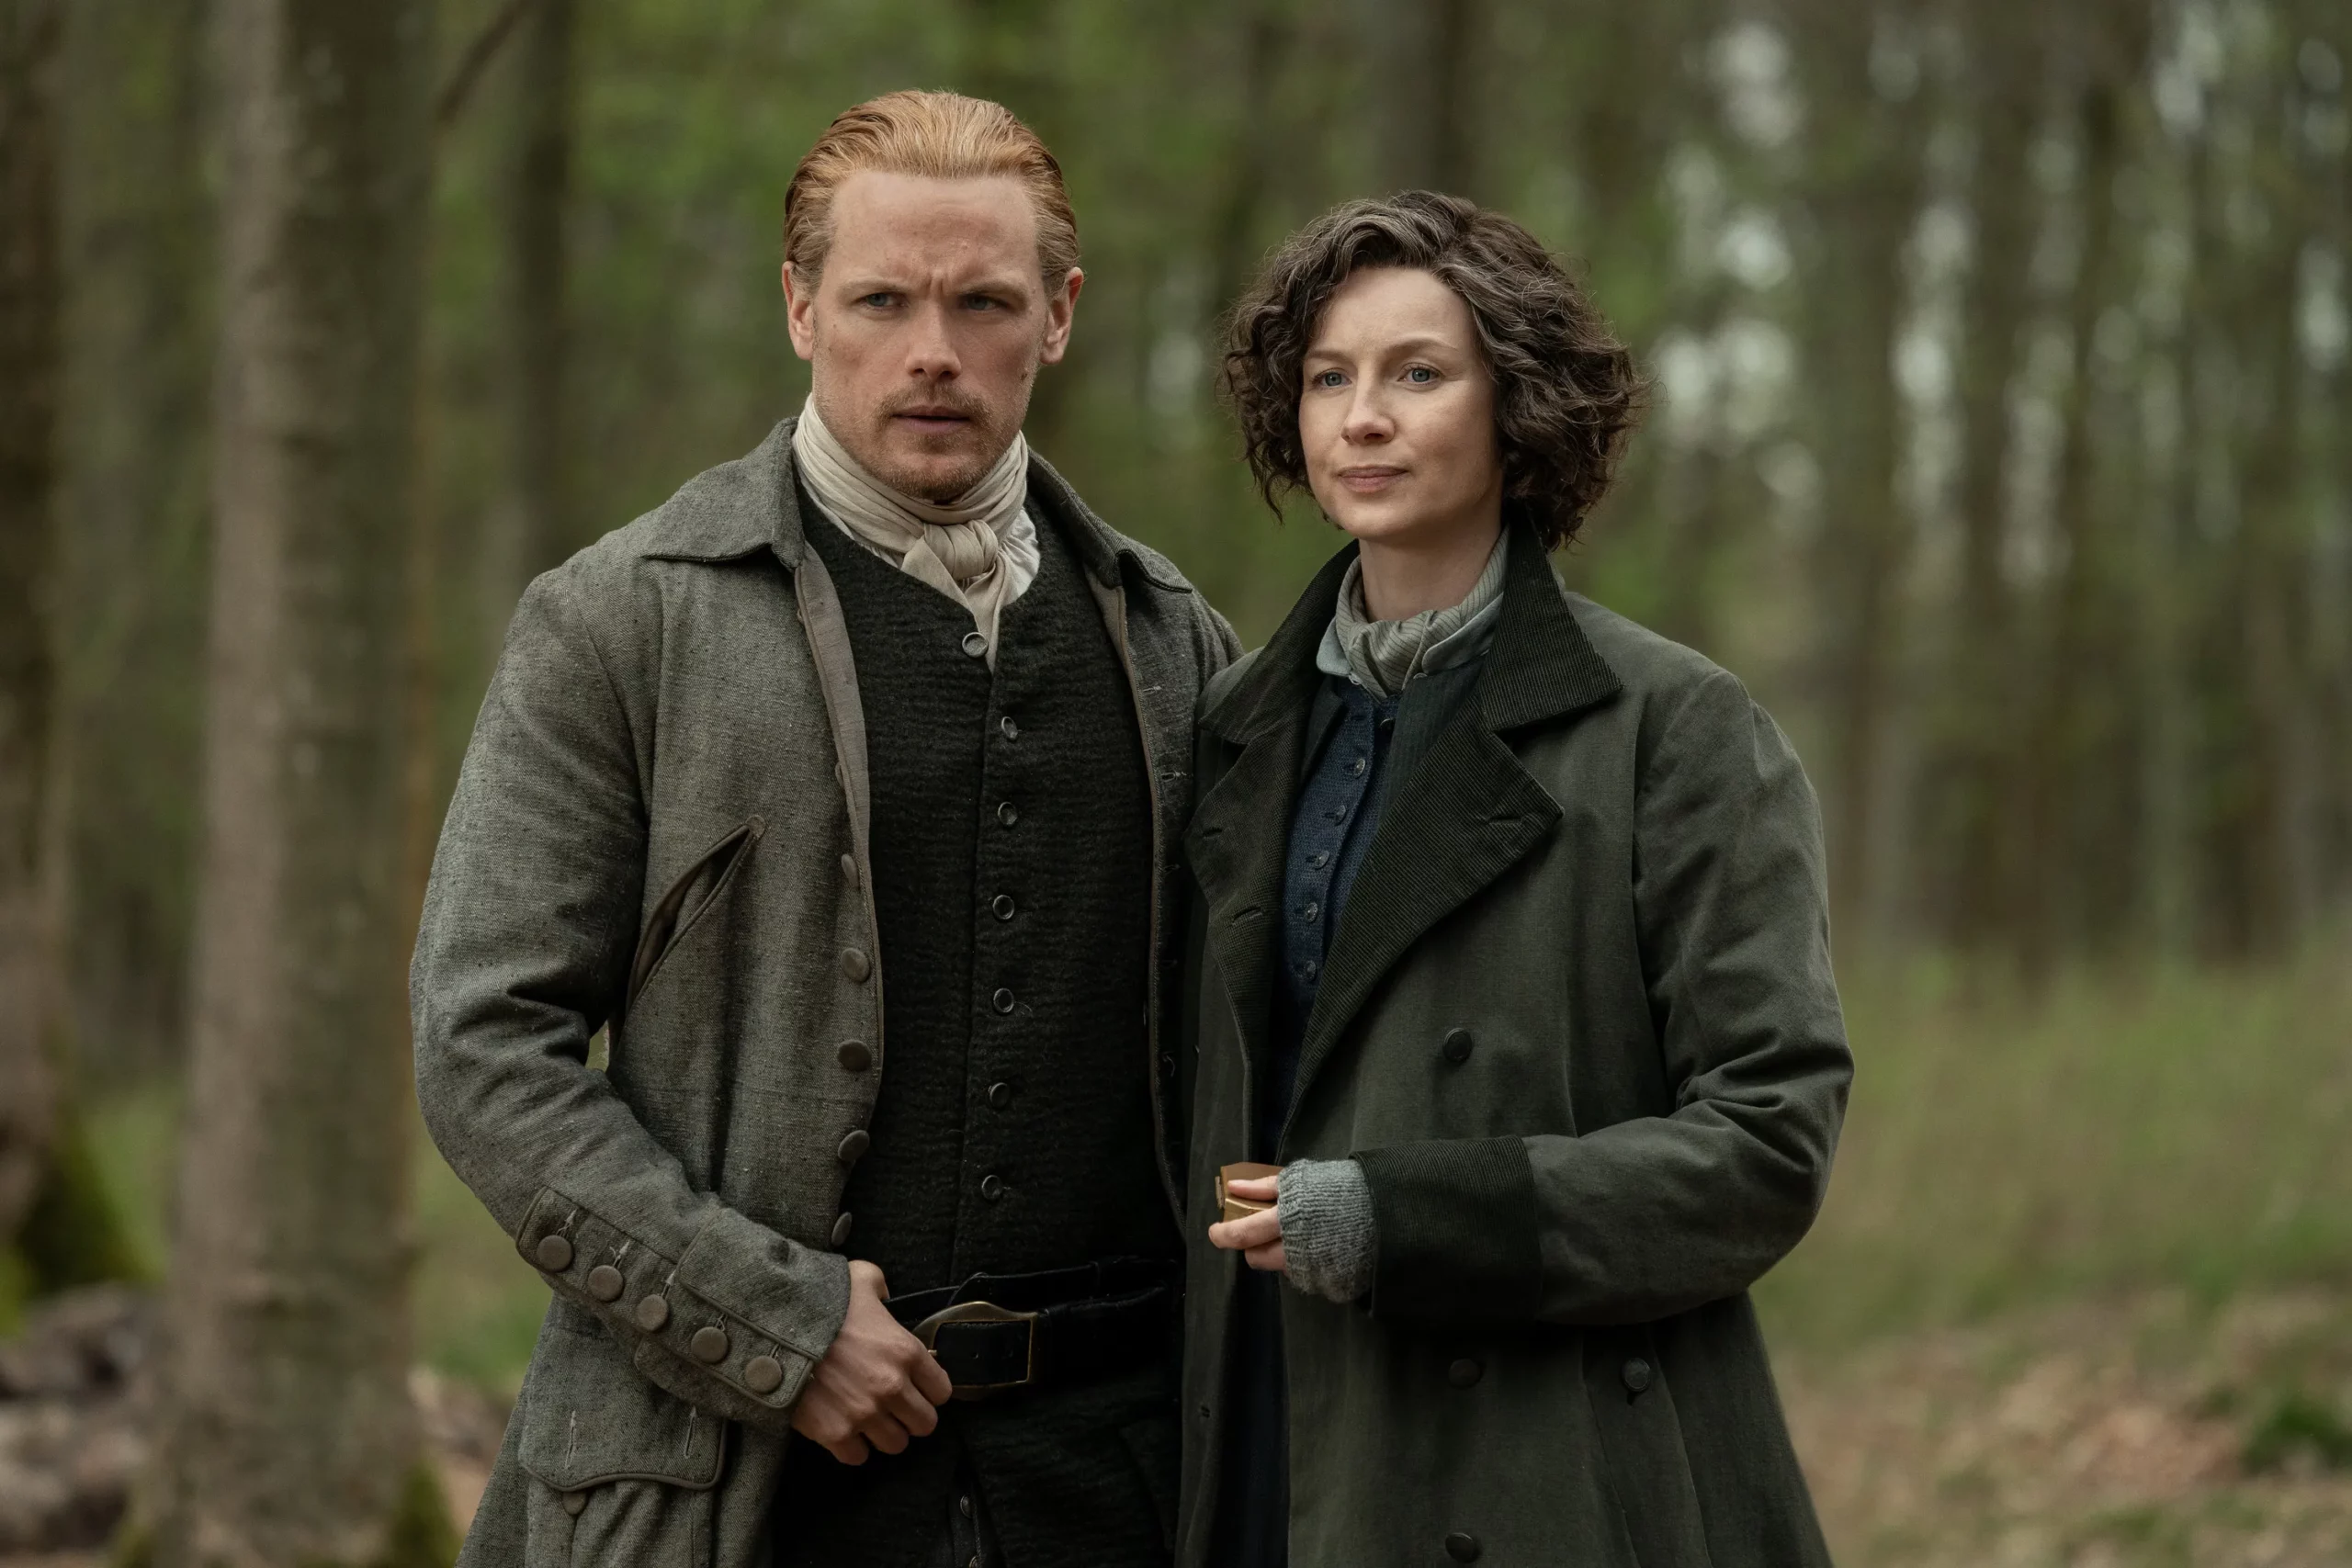 Outlander’s creator expresses ‘worry’ over the Jamie Fraser story in the midseason finale.